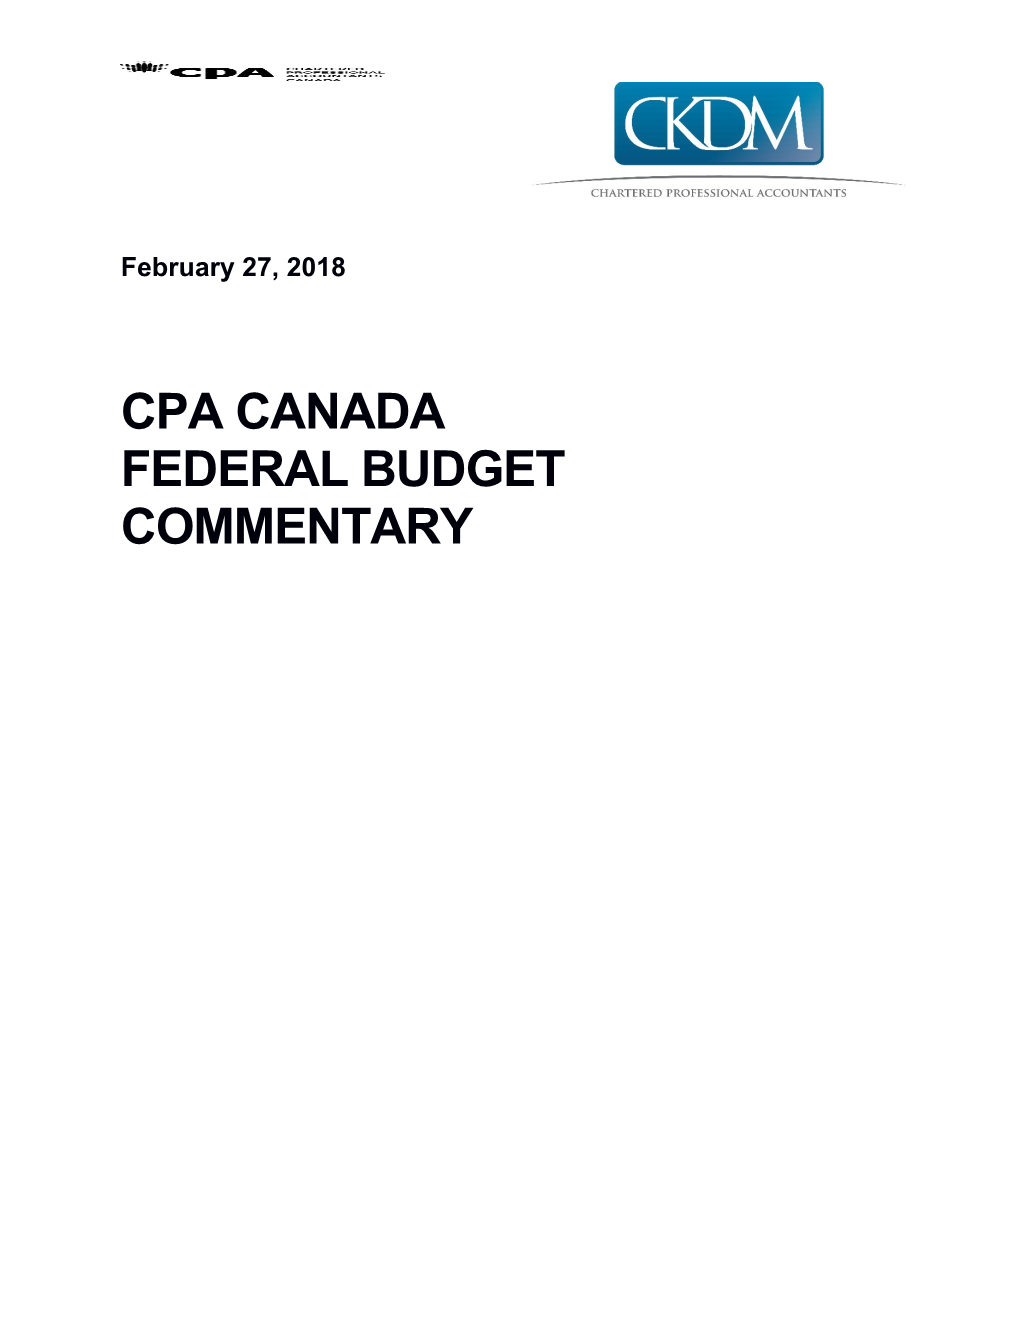 1Federal Budget Commentary 2018